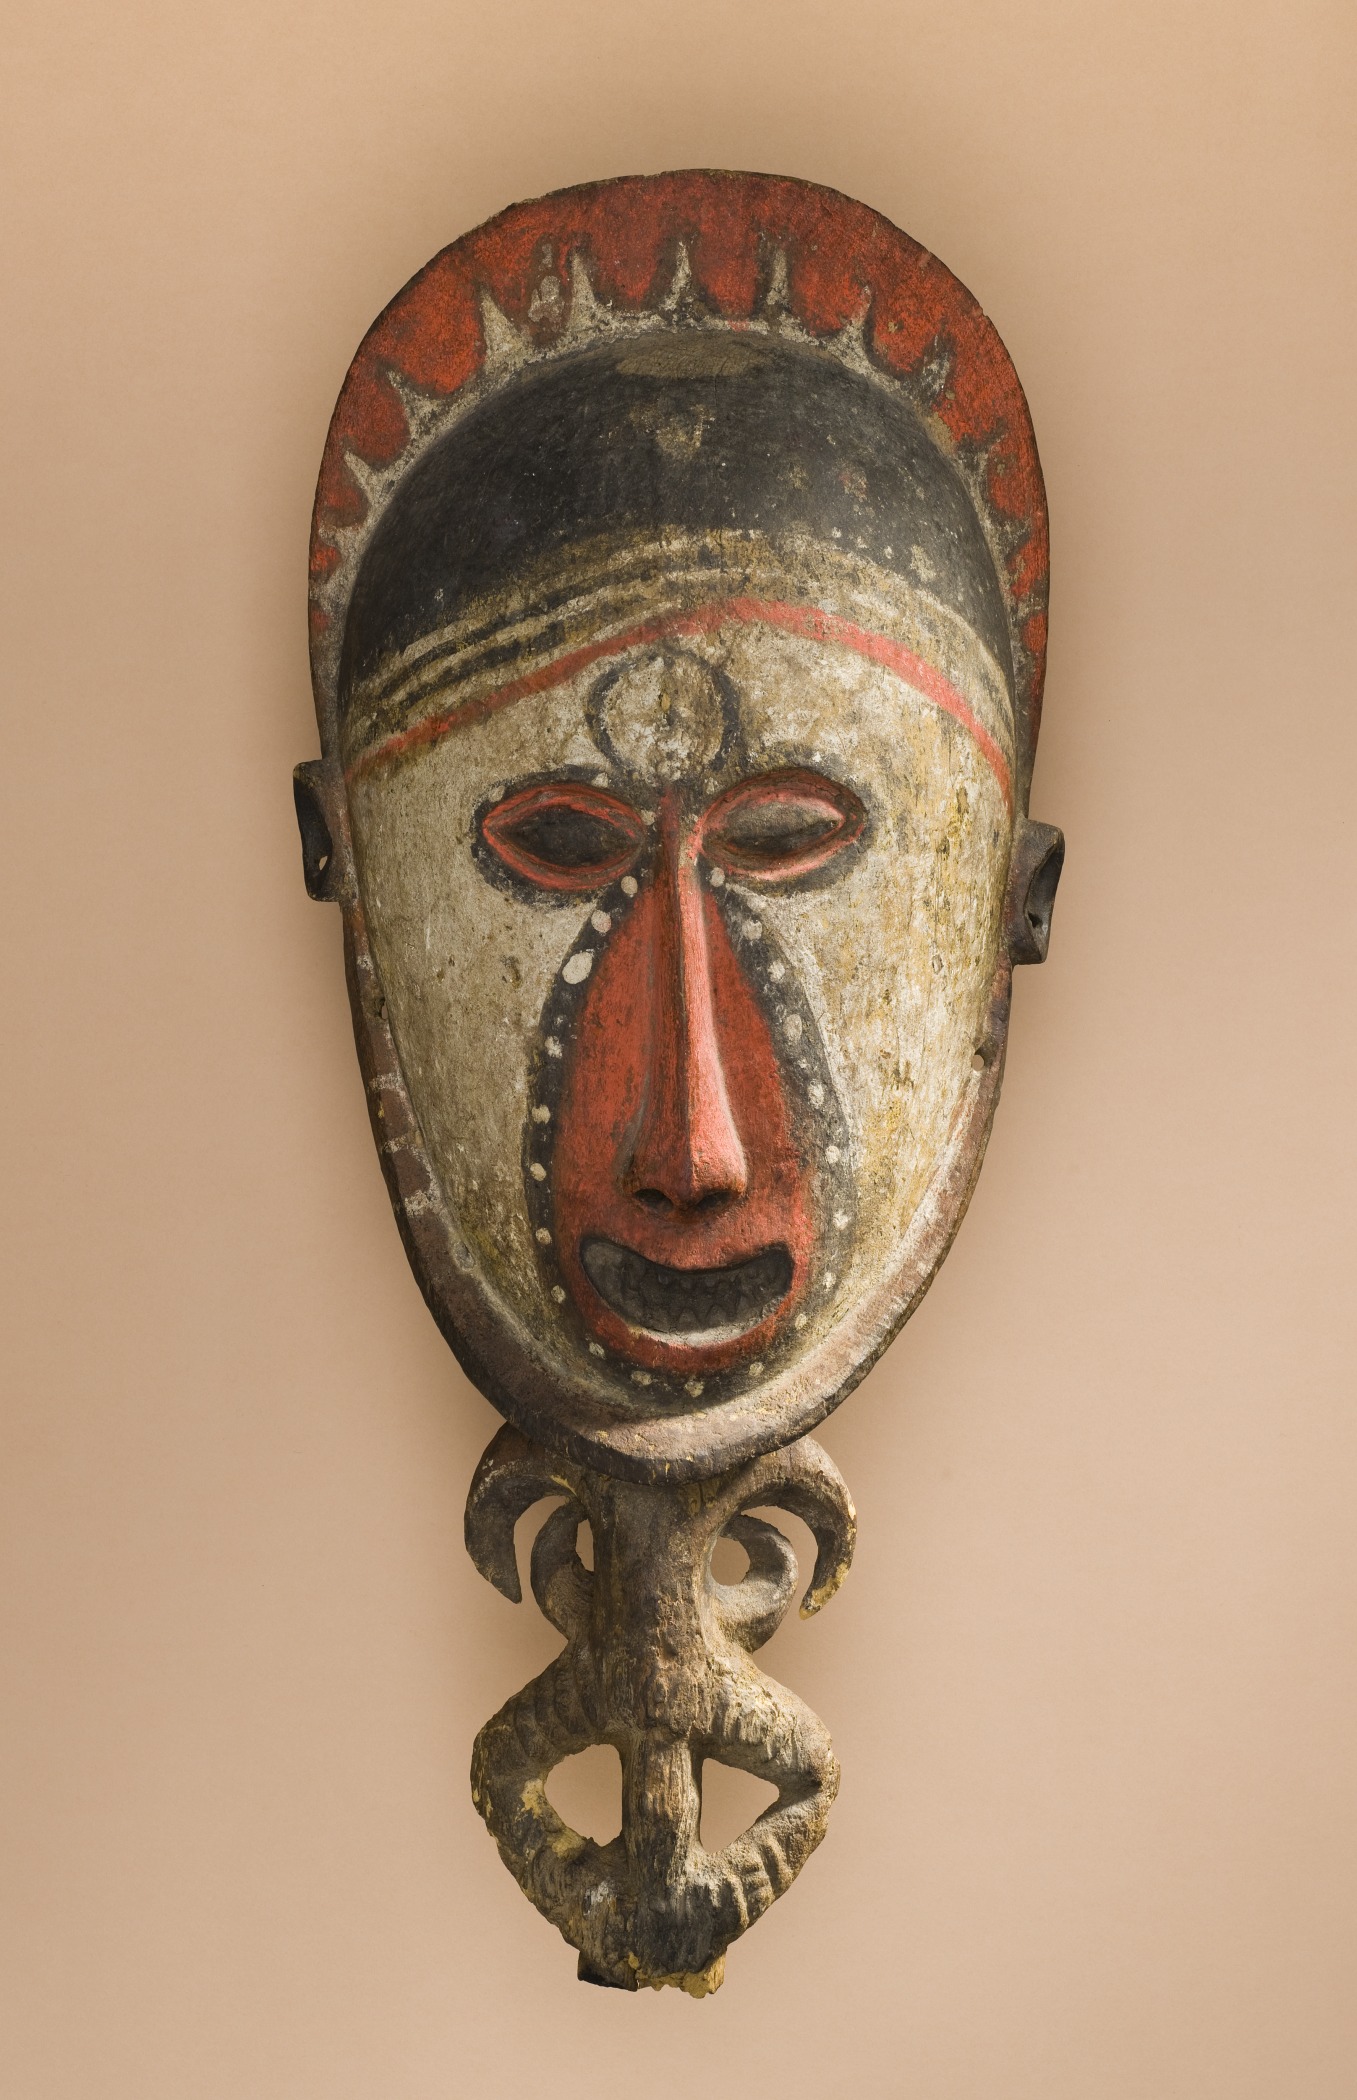 decorative mask hanging on wall against tan wall